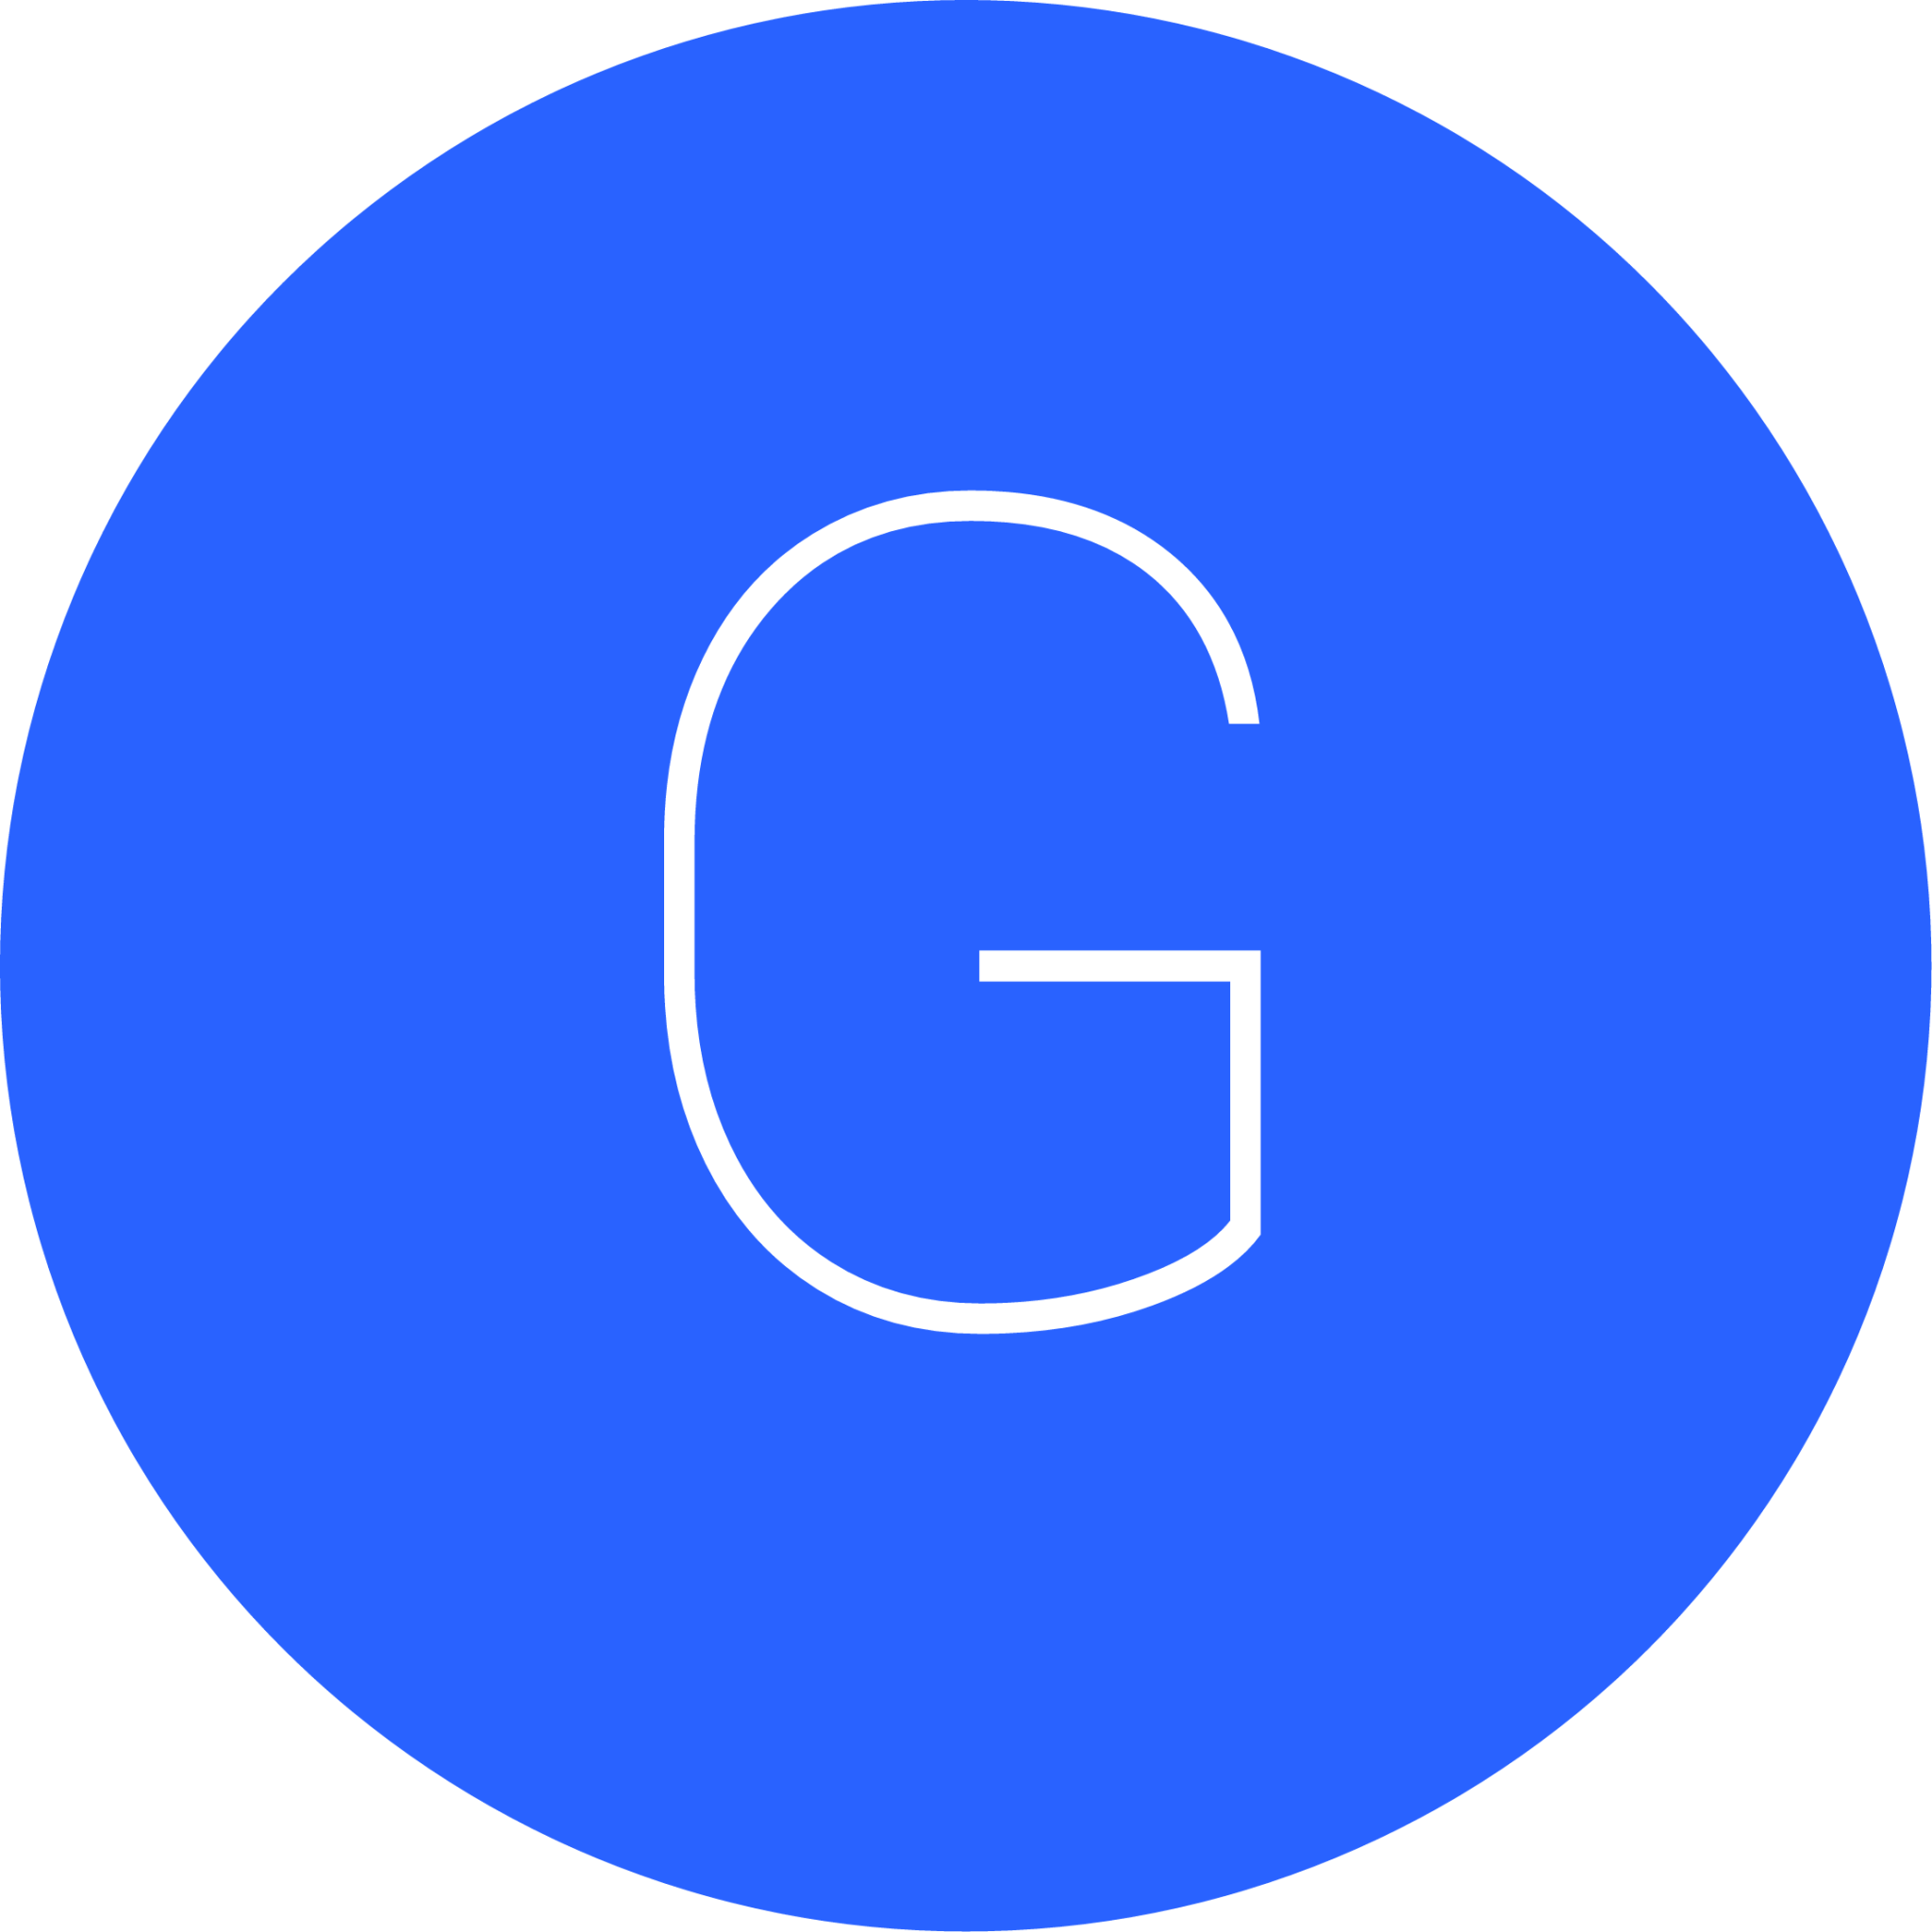 G letter icon